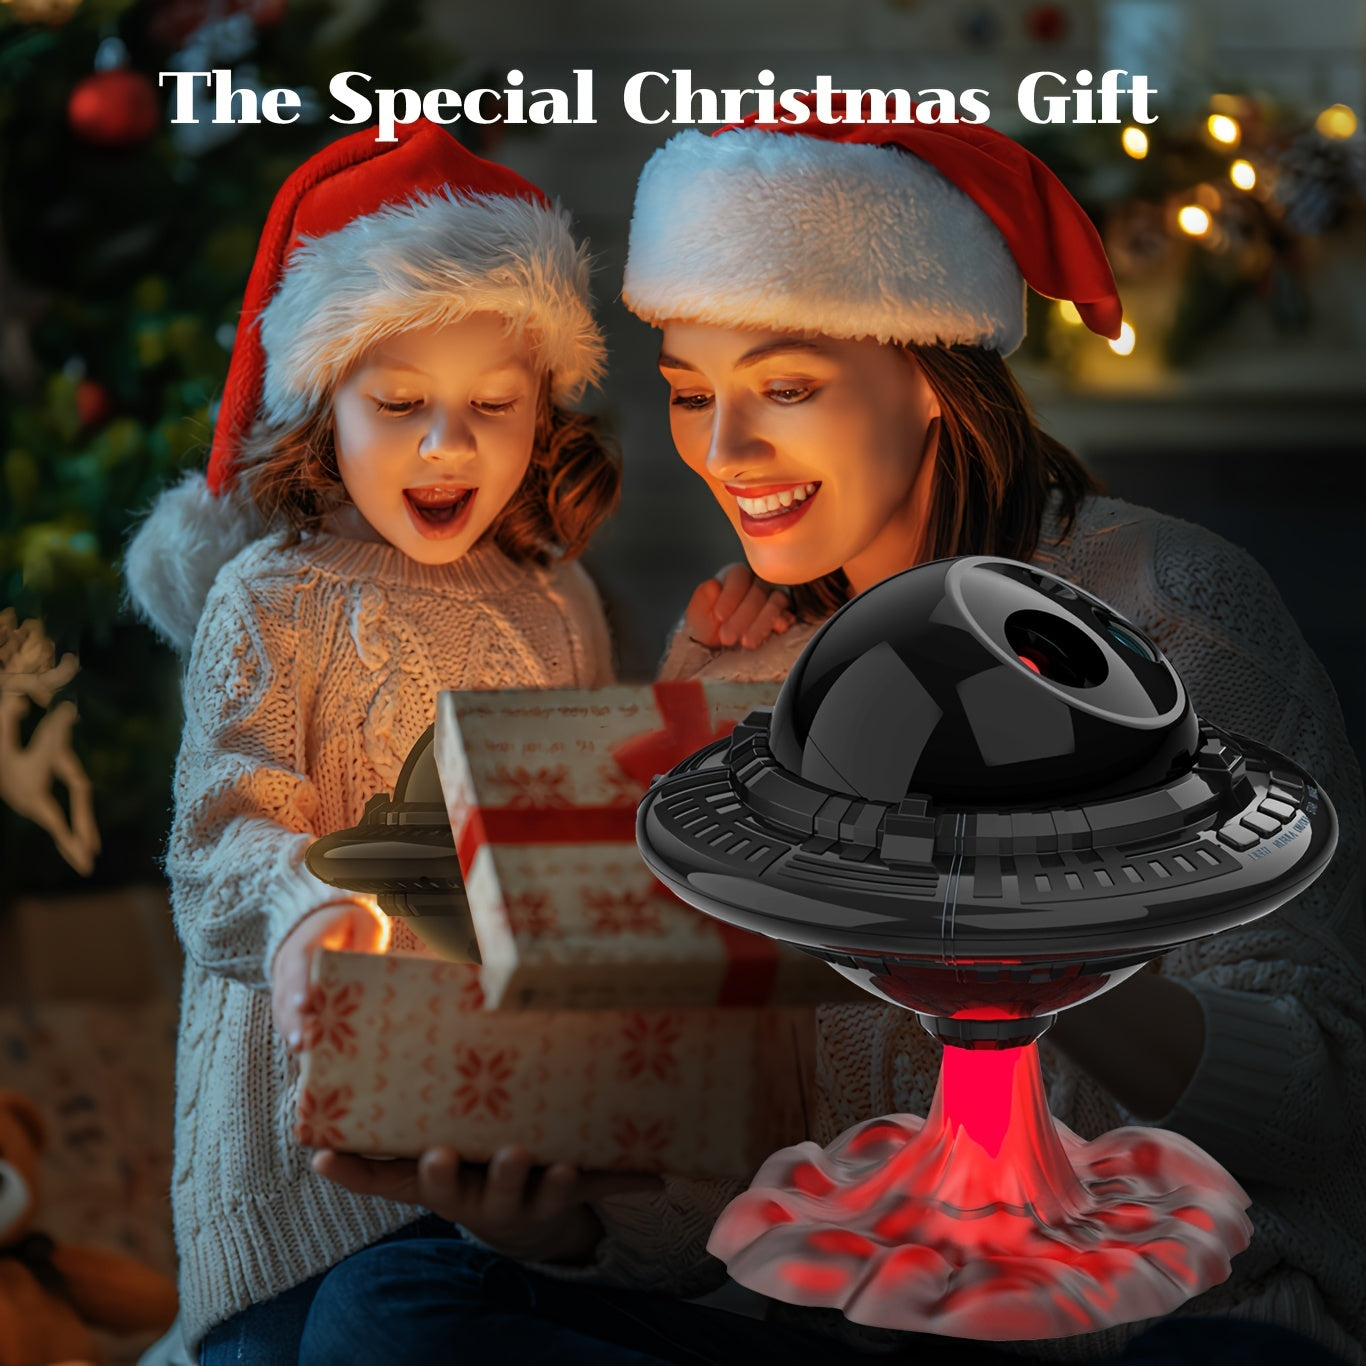 Light Up the Night Sky with this Magical Star Projector LED Lamp - Perfect for Kids Room Decor, Christmas, Birthdays & Valentine's Day!